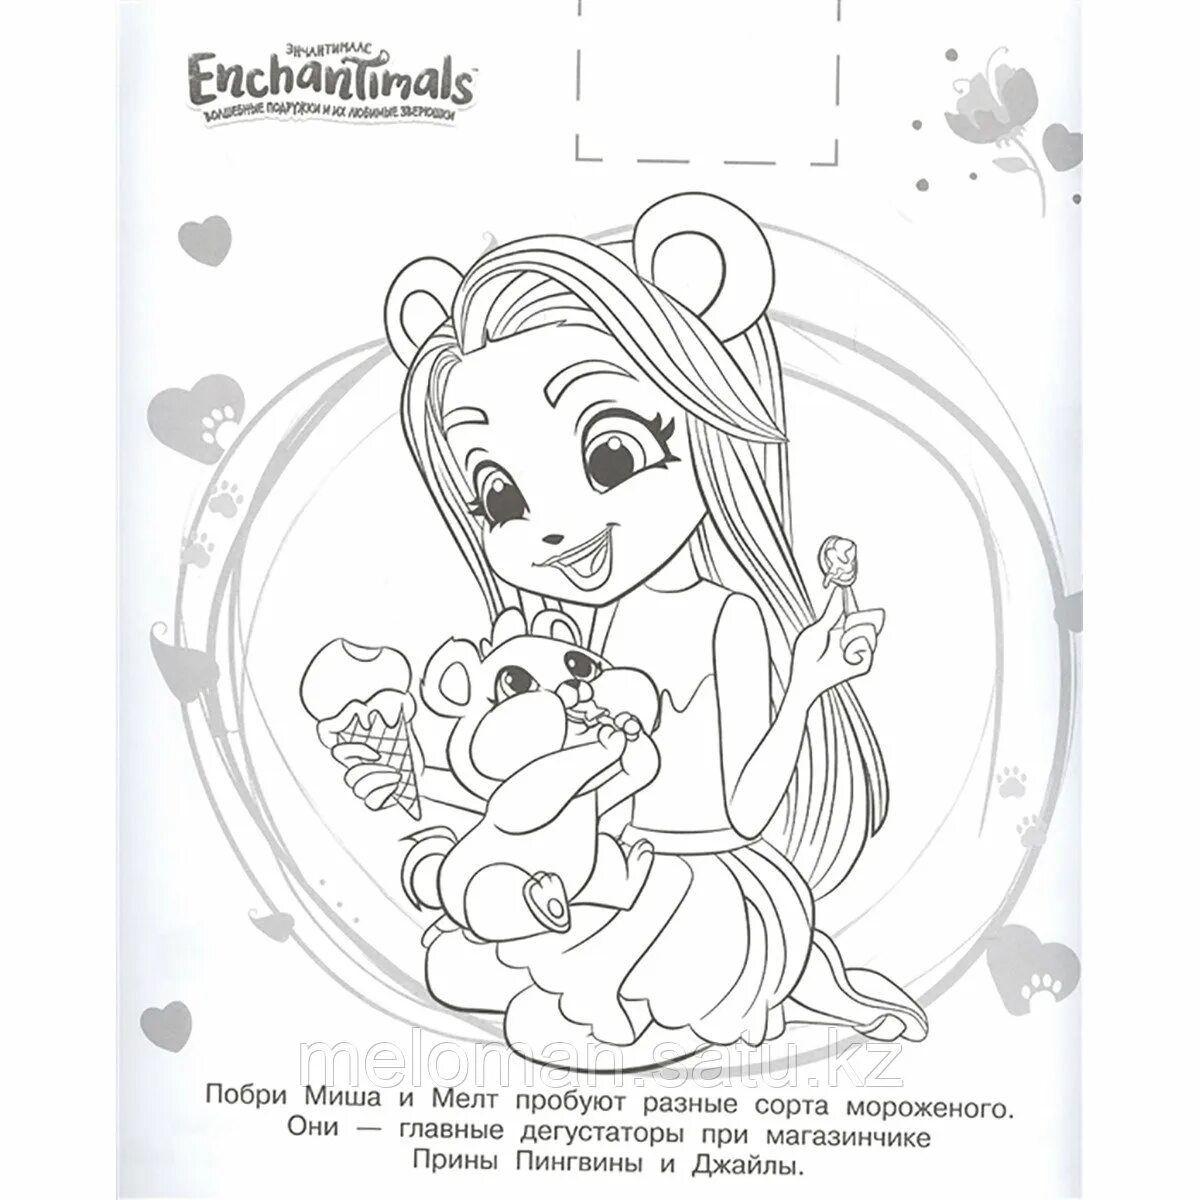 Witty enchantimals cat coloring book